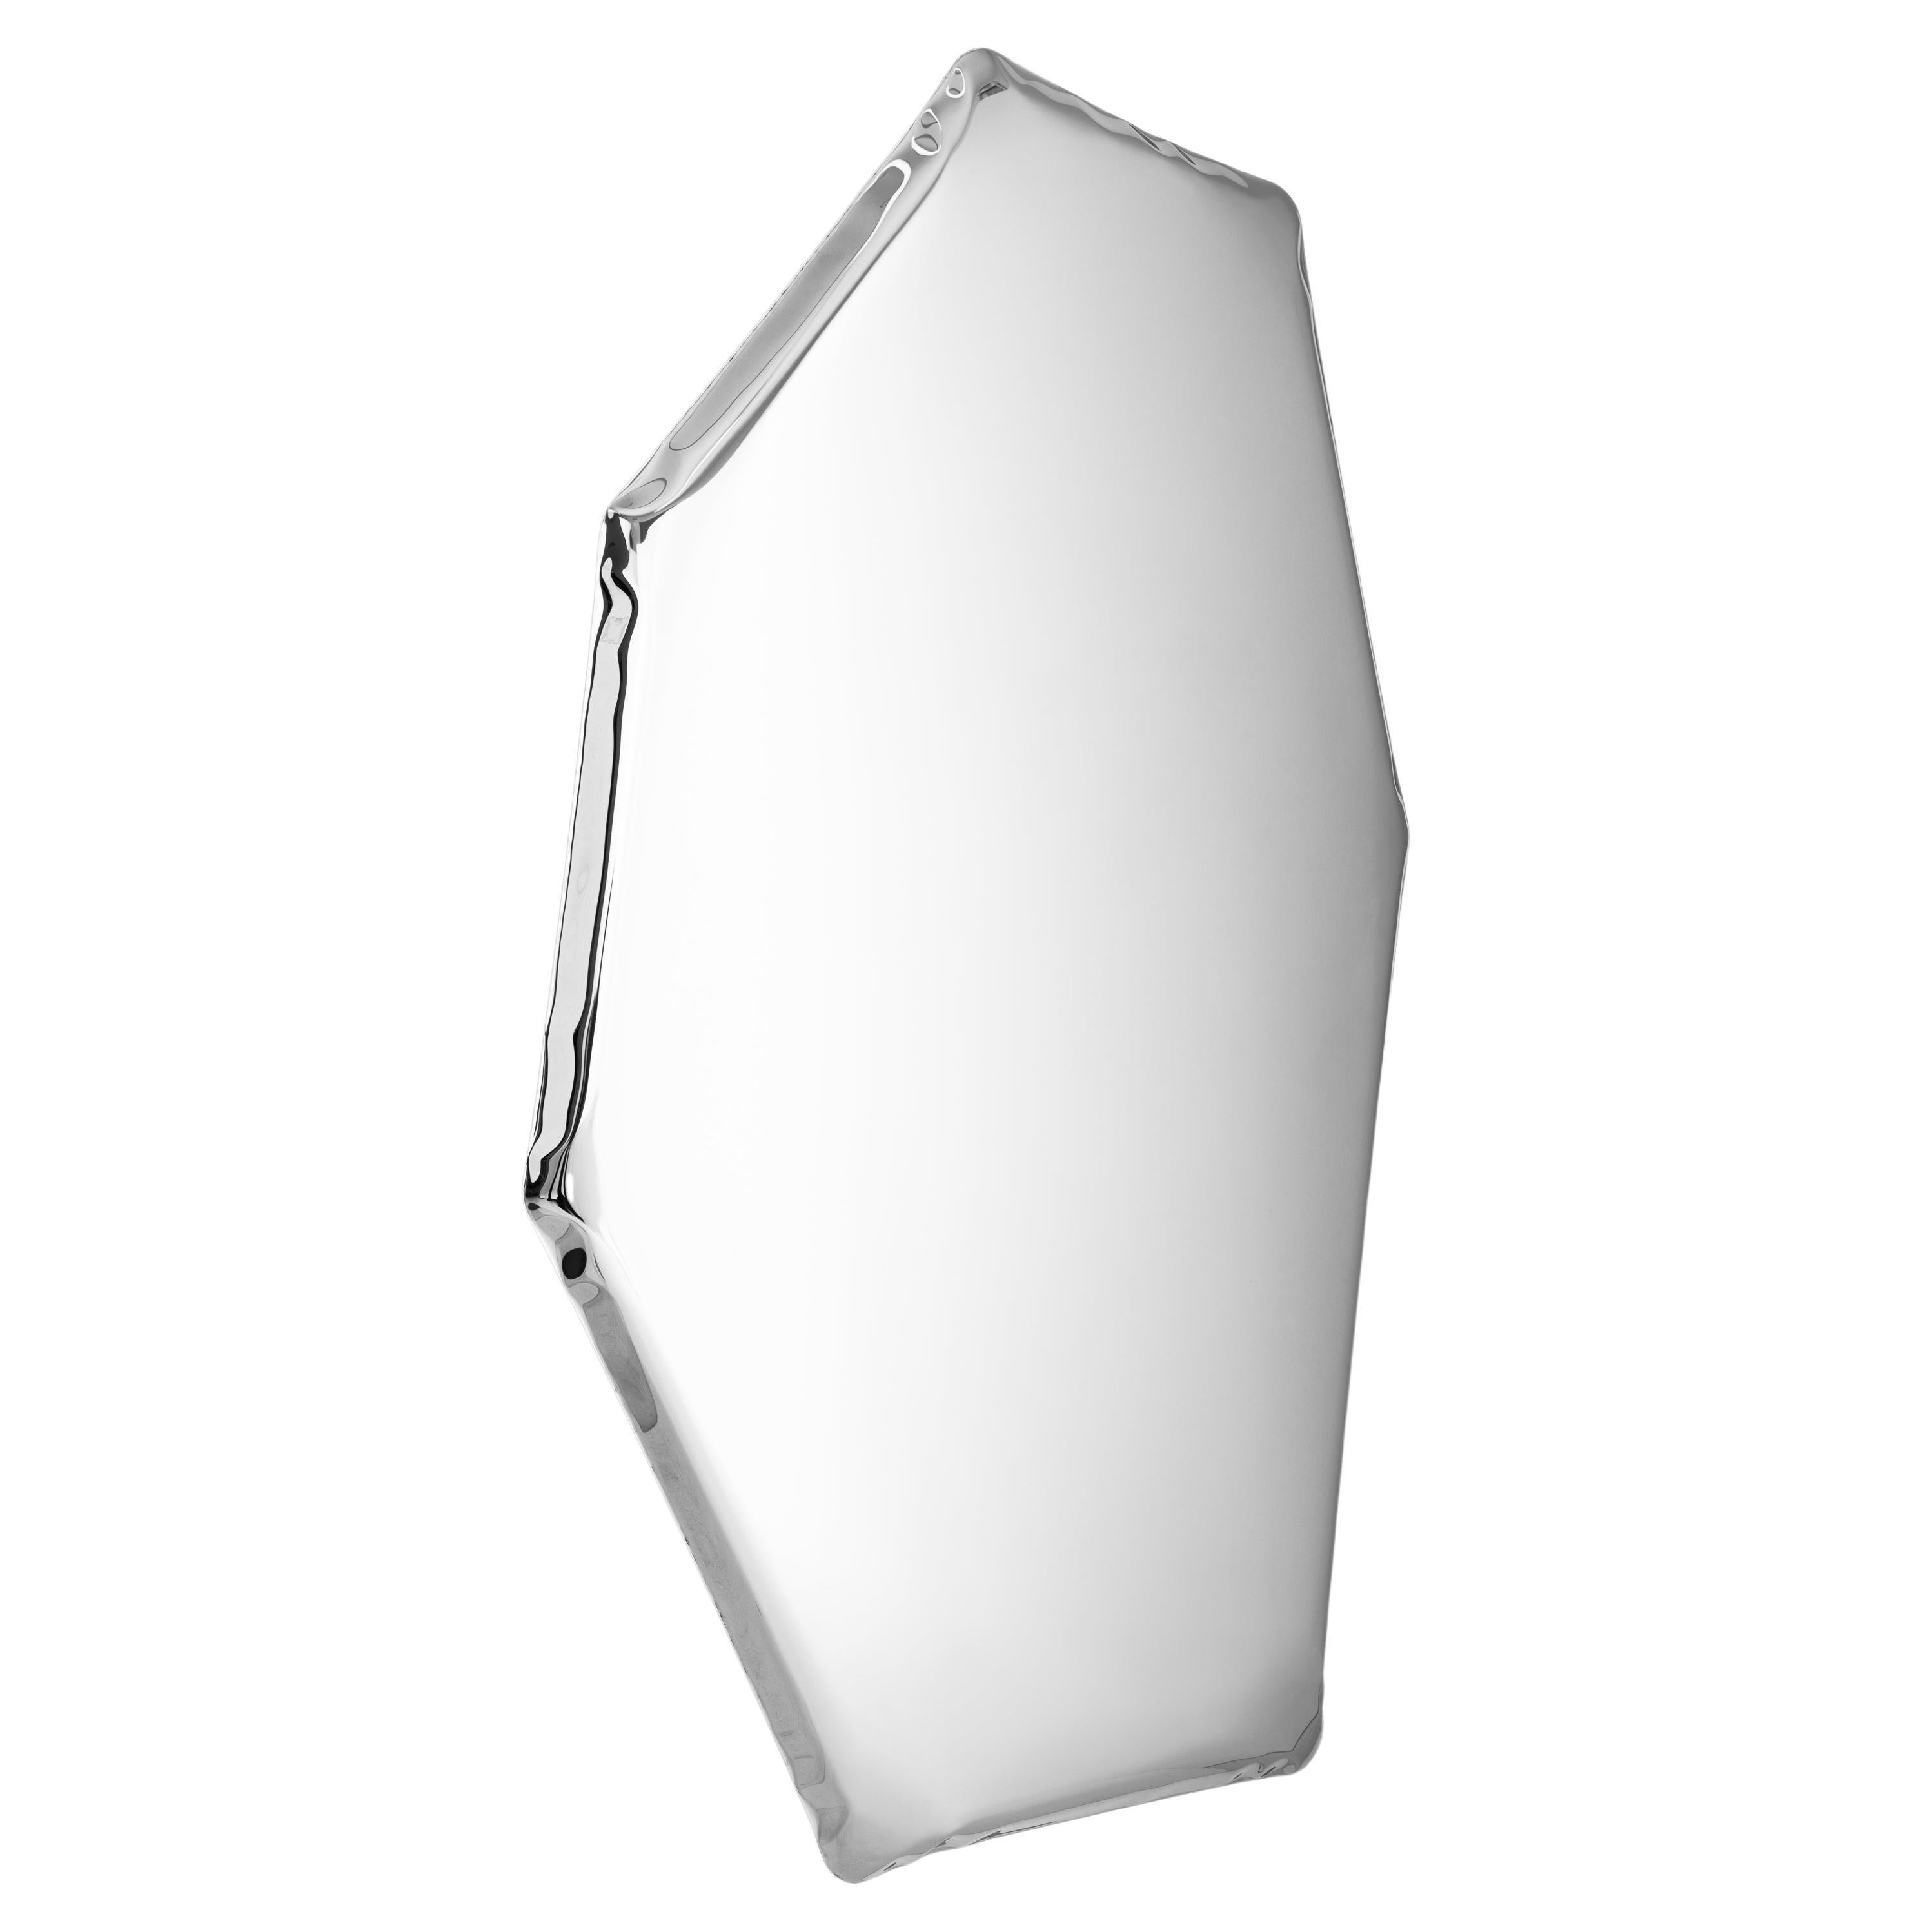 Tafla C2 Polished Stainless Steel Wall Mirror by Zieta For Sale